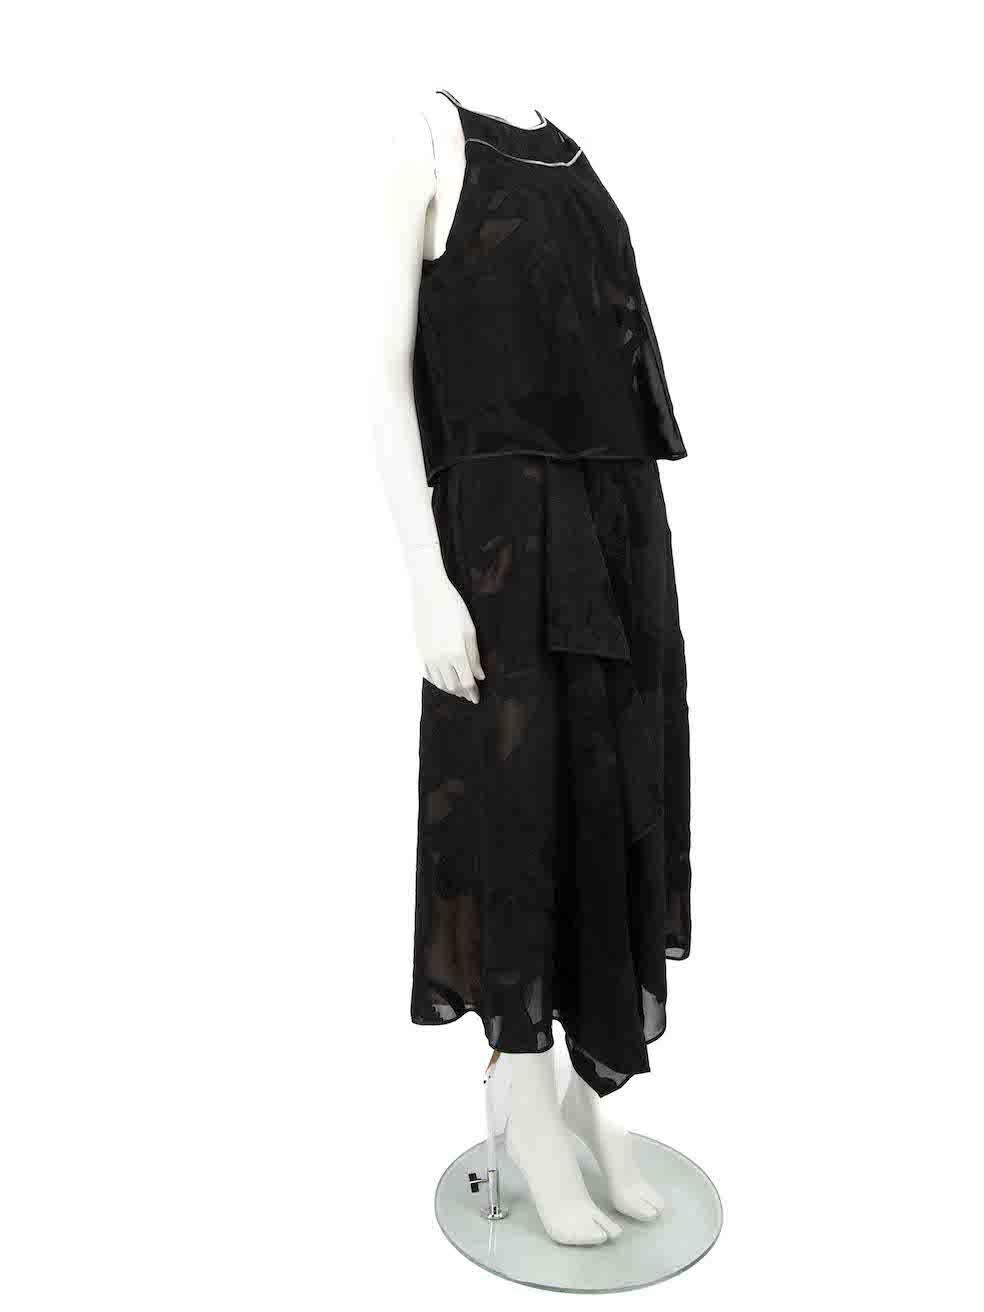 CONDITION is Very good. Hardly any visible wear to dress is evident on this used Amanda Wakeley designer resale item.
 
 Details
 Black
 Polyester
 Dress
 Midi
 Floral pattern
 Round neck
 Sleeveless
 Sheer back mesh panel
 Layered ruffle skirt
